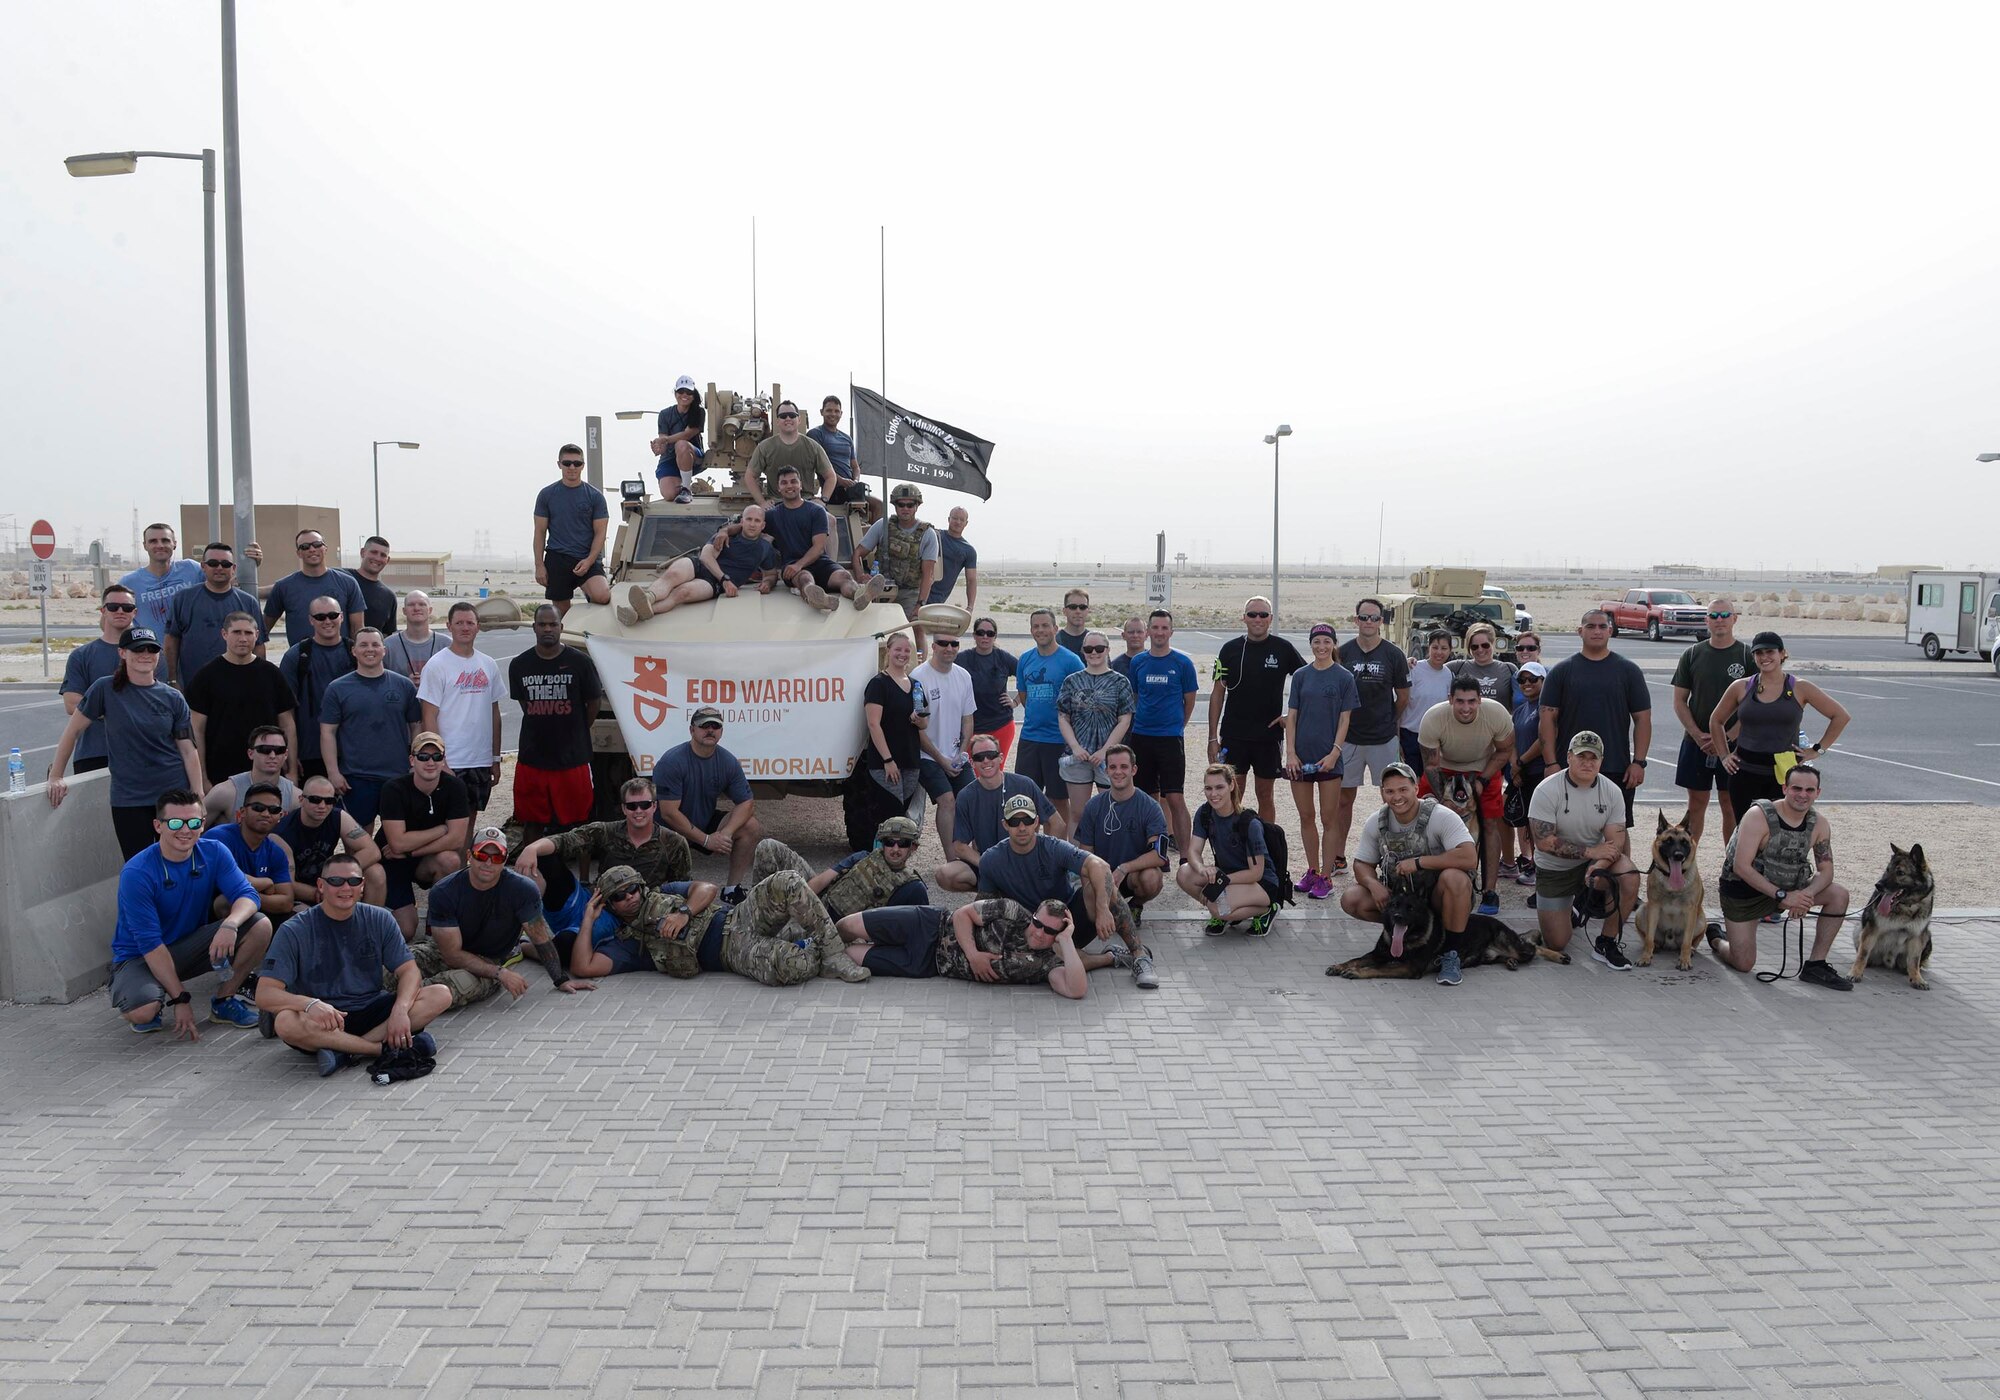 Service members who participated in the annual Explosive Ordinance Disposal 5K Memorial Run at Al Udeid Air Base, Qatar, June 3, 2017 pose for a group photograph after the run. Service members from across the base gathered to take part in the EOD 5K Memorial Run in memory of the EOD men and women killed in action during combat operations. (U.S. Air Force photo by Tech. Sgt. Bradly A. Schneider/Released)